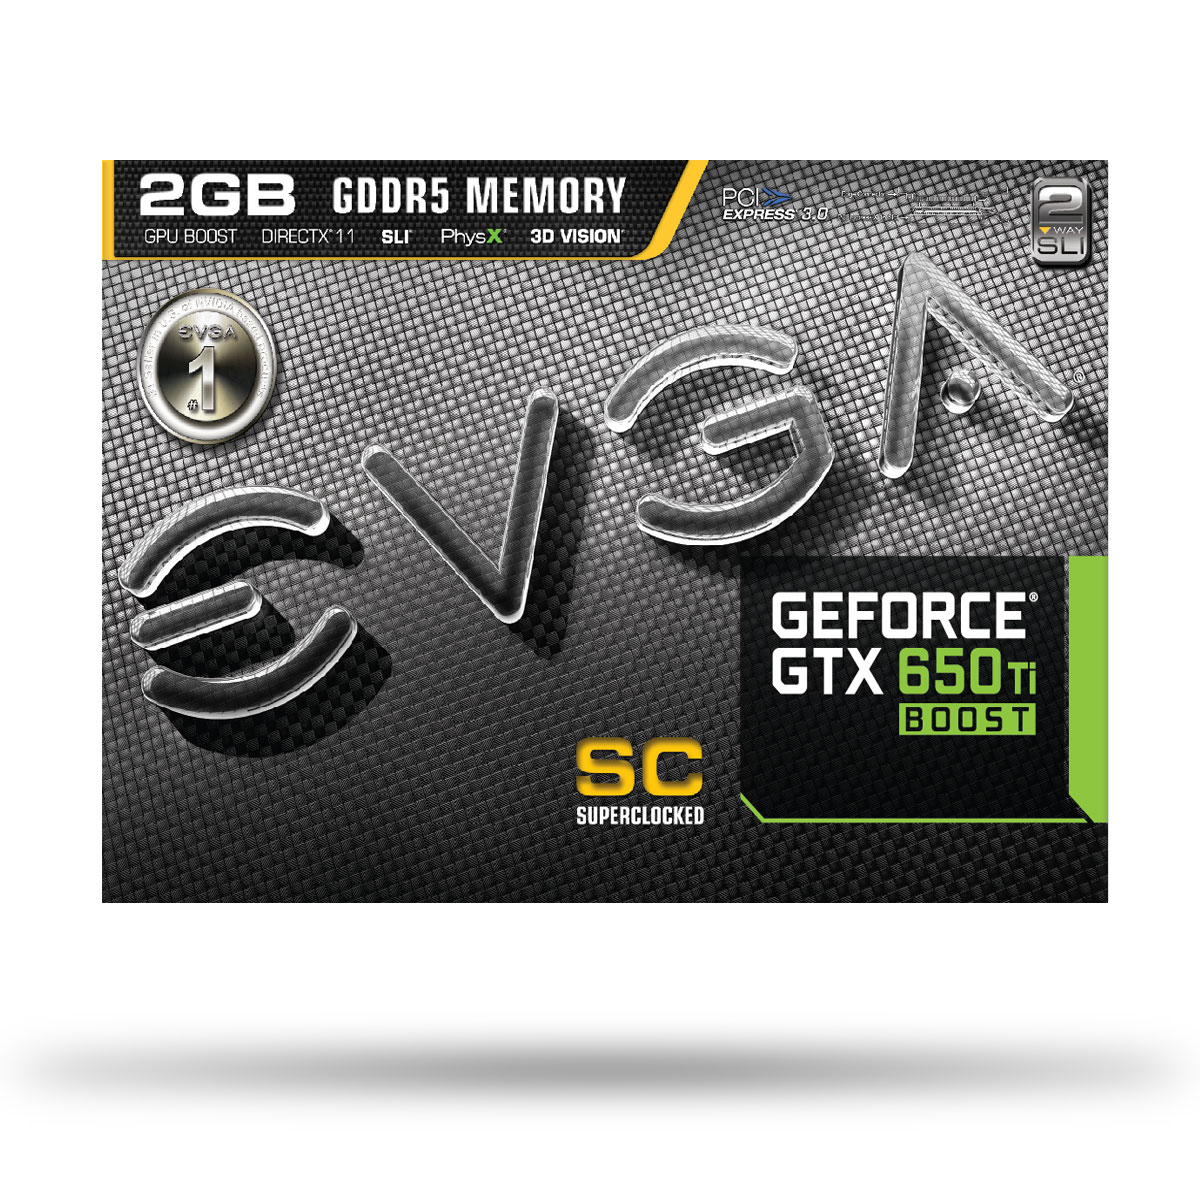 Evga Geforce Gtx 650 Ti Boost Superclocked 2gb Review Dom S Tech Computer Blog